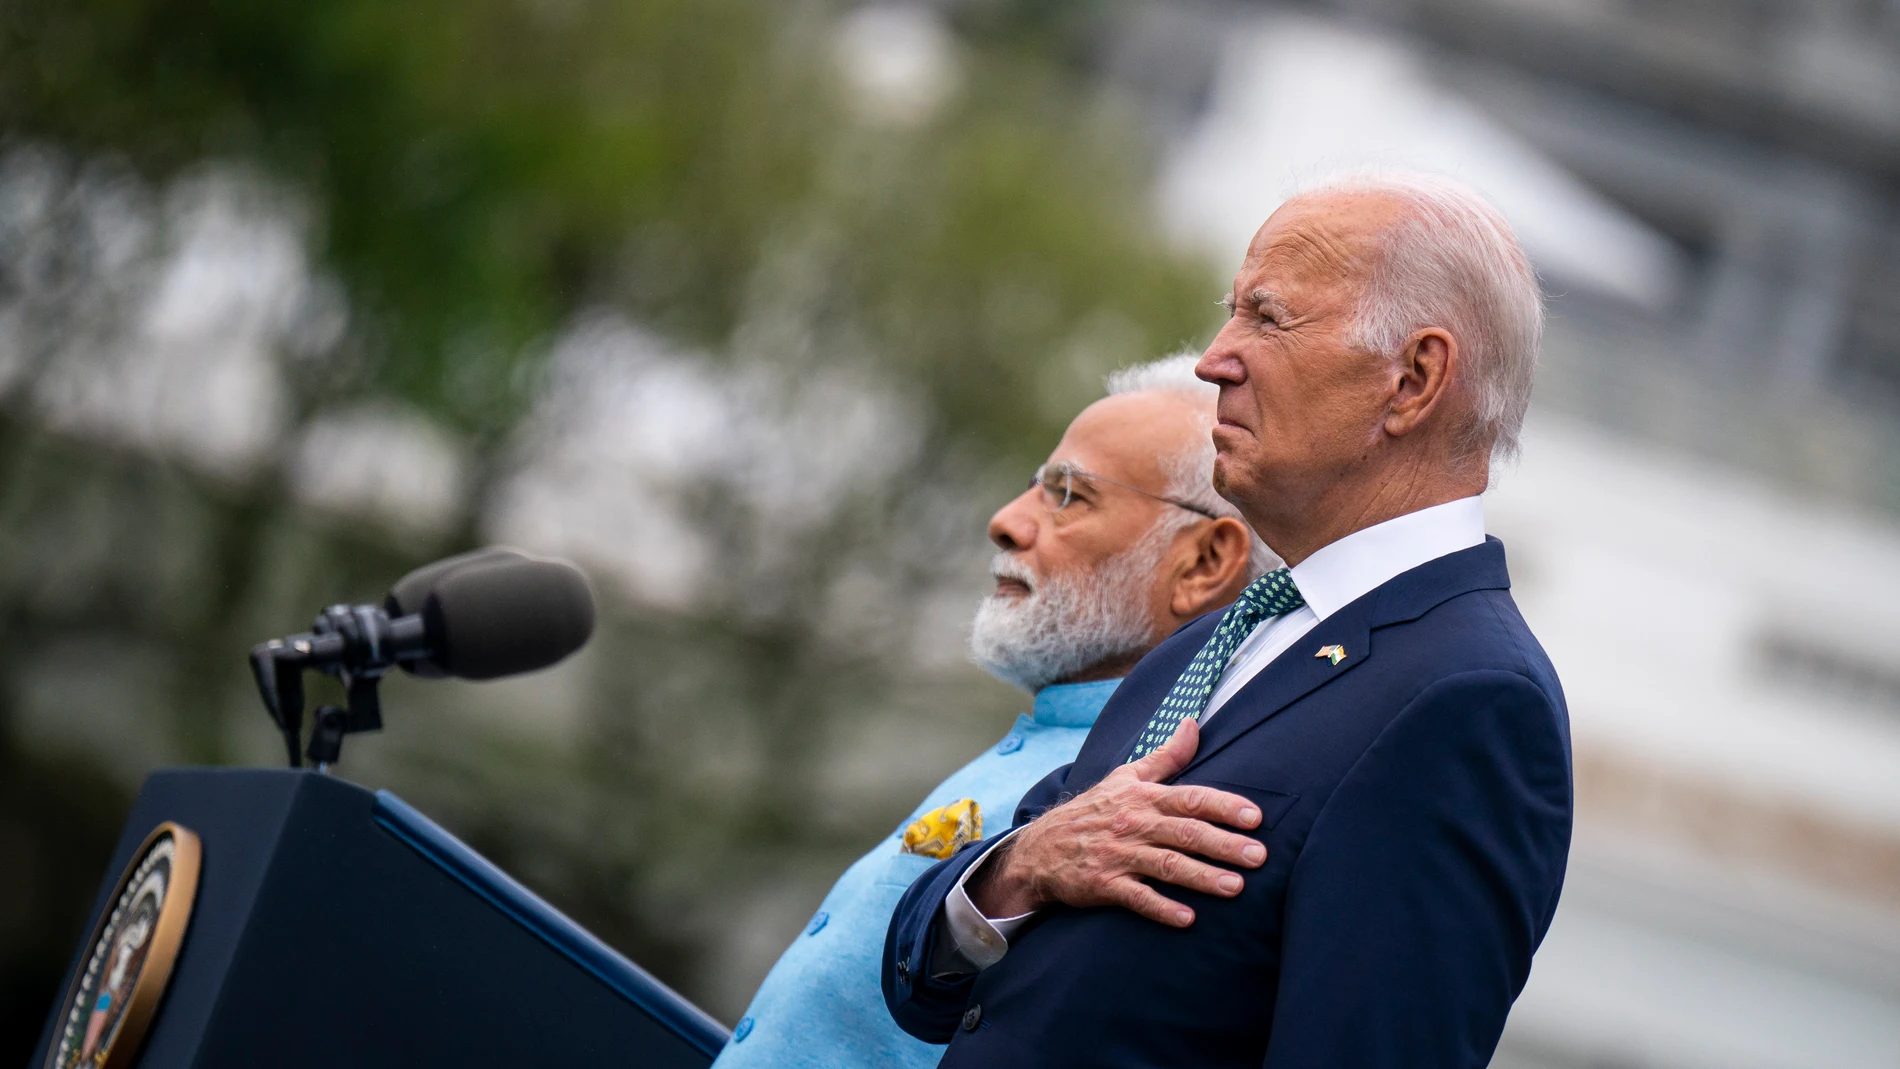 Washington (United States), 22/06/2023.- US President Joe Biden and India's Prime Minister Narendra Modi (L) at an arrival ceremony during a state visit on the South Lawn of the White House in Washington, DC, USA, 22 June 2023. The US and Indian leaders will announce a series of defense and commercial deals designed to improve military and economic ties between their nations during the Indian prime minister's state visit, senior US officials said. (Estados Unidos) EFE/EPA/AL DRAGO / POOL